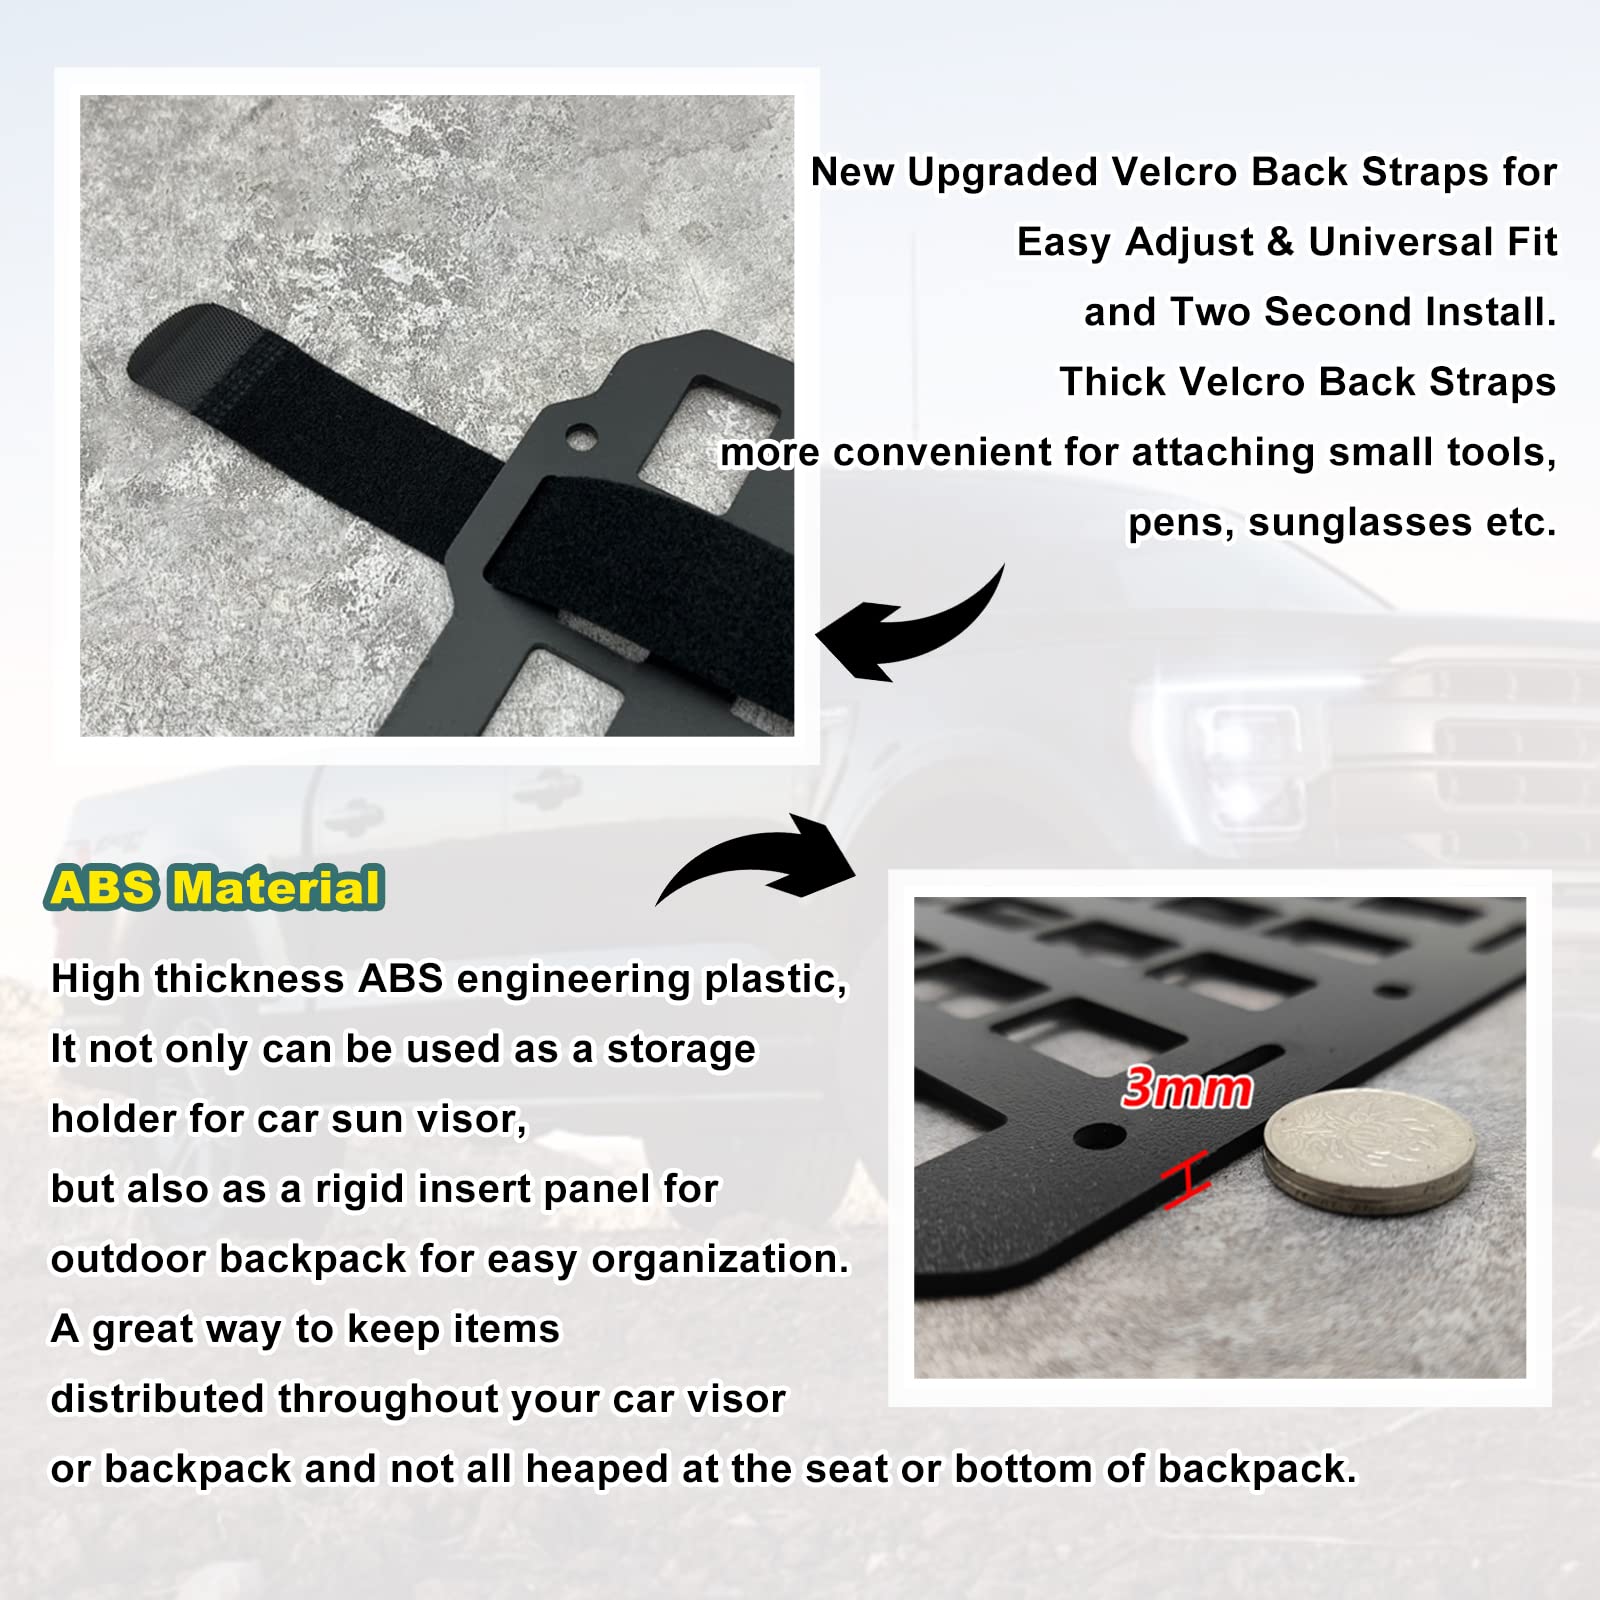 Vehicle Rigid Panel Compatible with Backpack Tactical Accessories for Car Headrest Gear Holder Molle Pouches EDC Tools